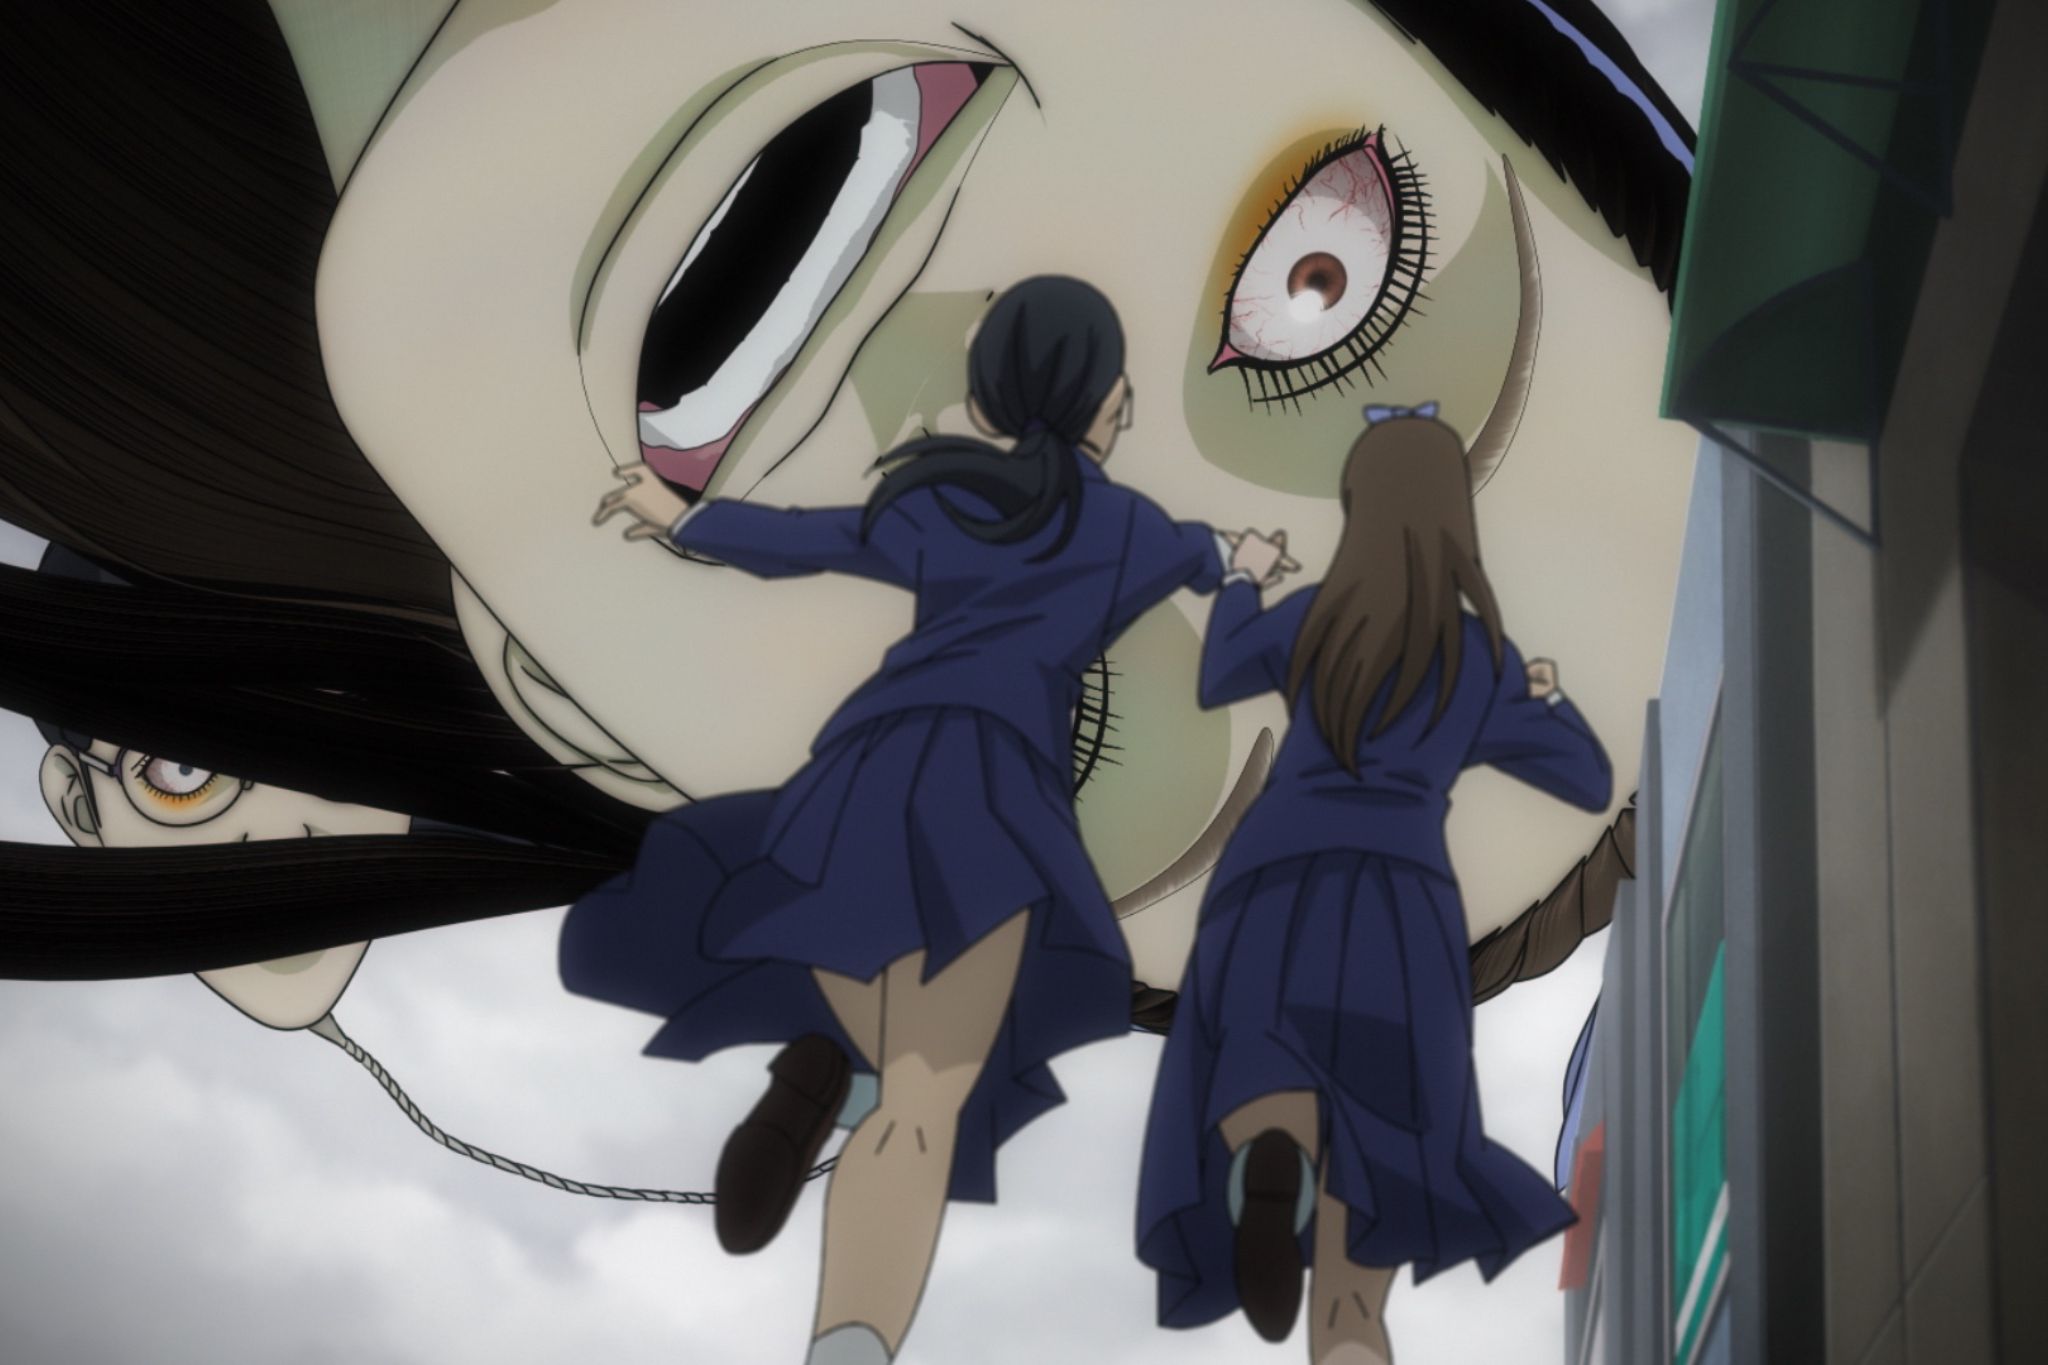 Junji Ito fans, the Uzumaki anime is still on its way! And here is the  latest teaser